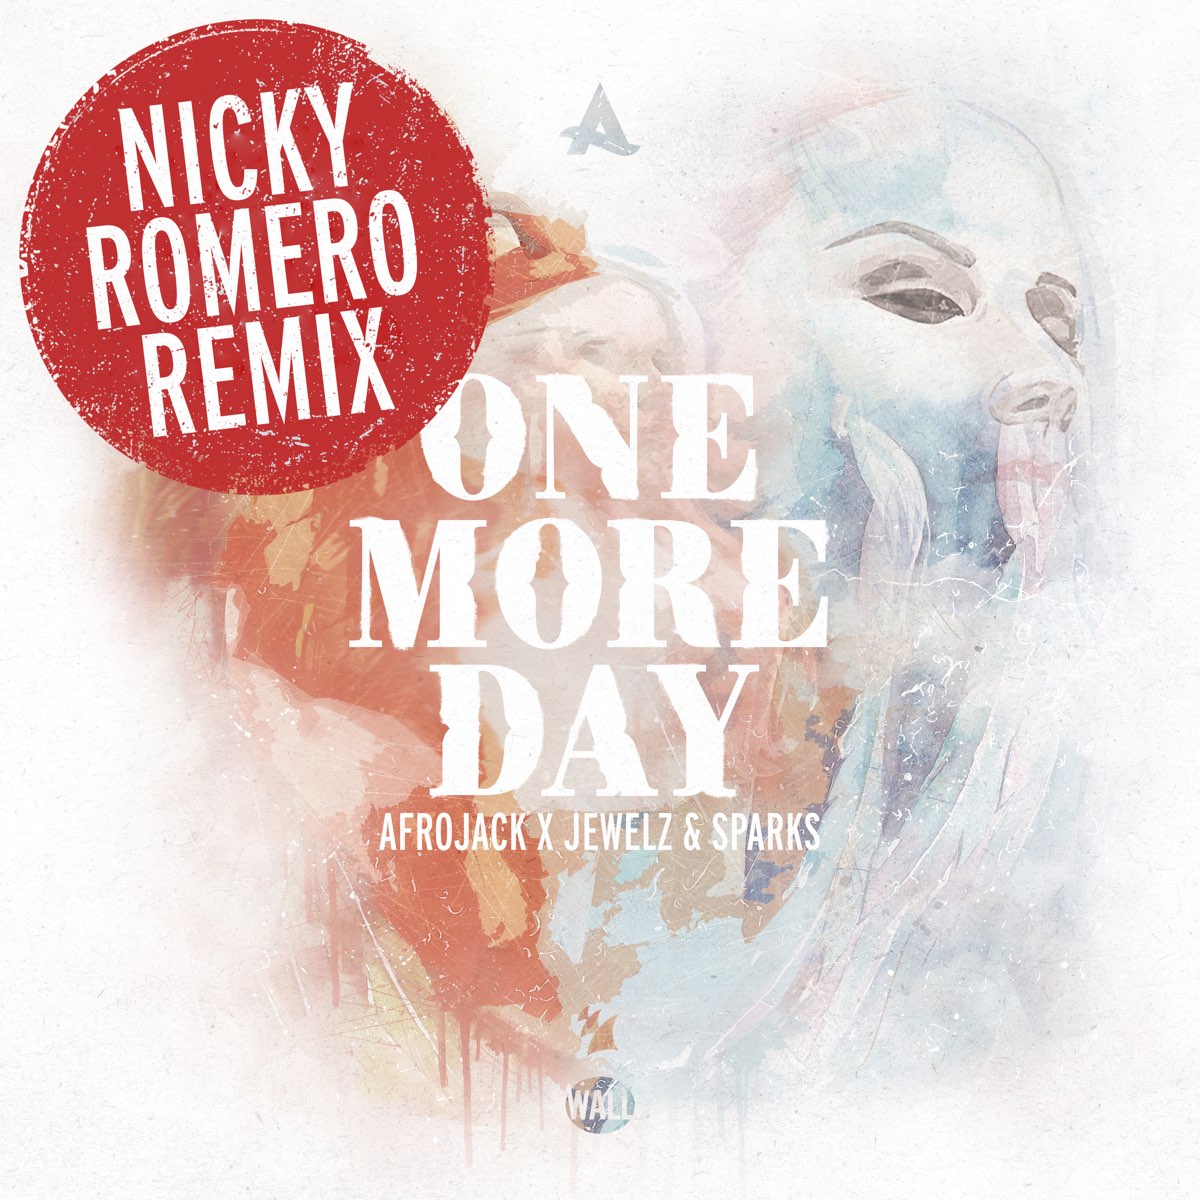 Jewelz & Sparks. One Day more. Afrojack and Jewelz & Sparks – one more Day (Nicky Romero Remix). Nicky Romero Remix. Pedro jaxomi agatino romero remix